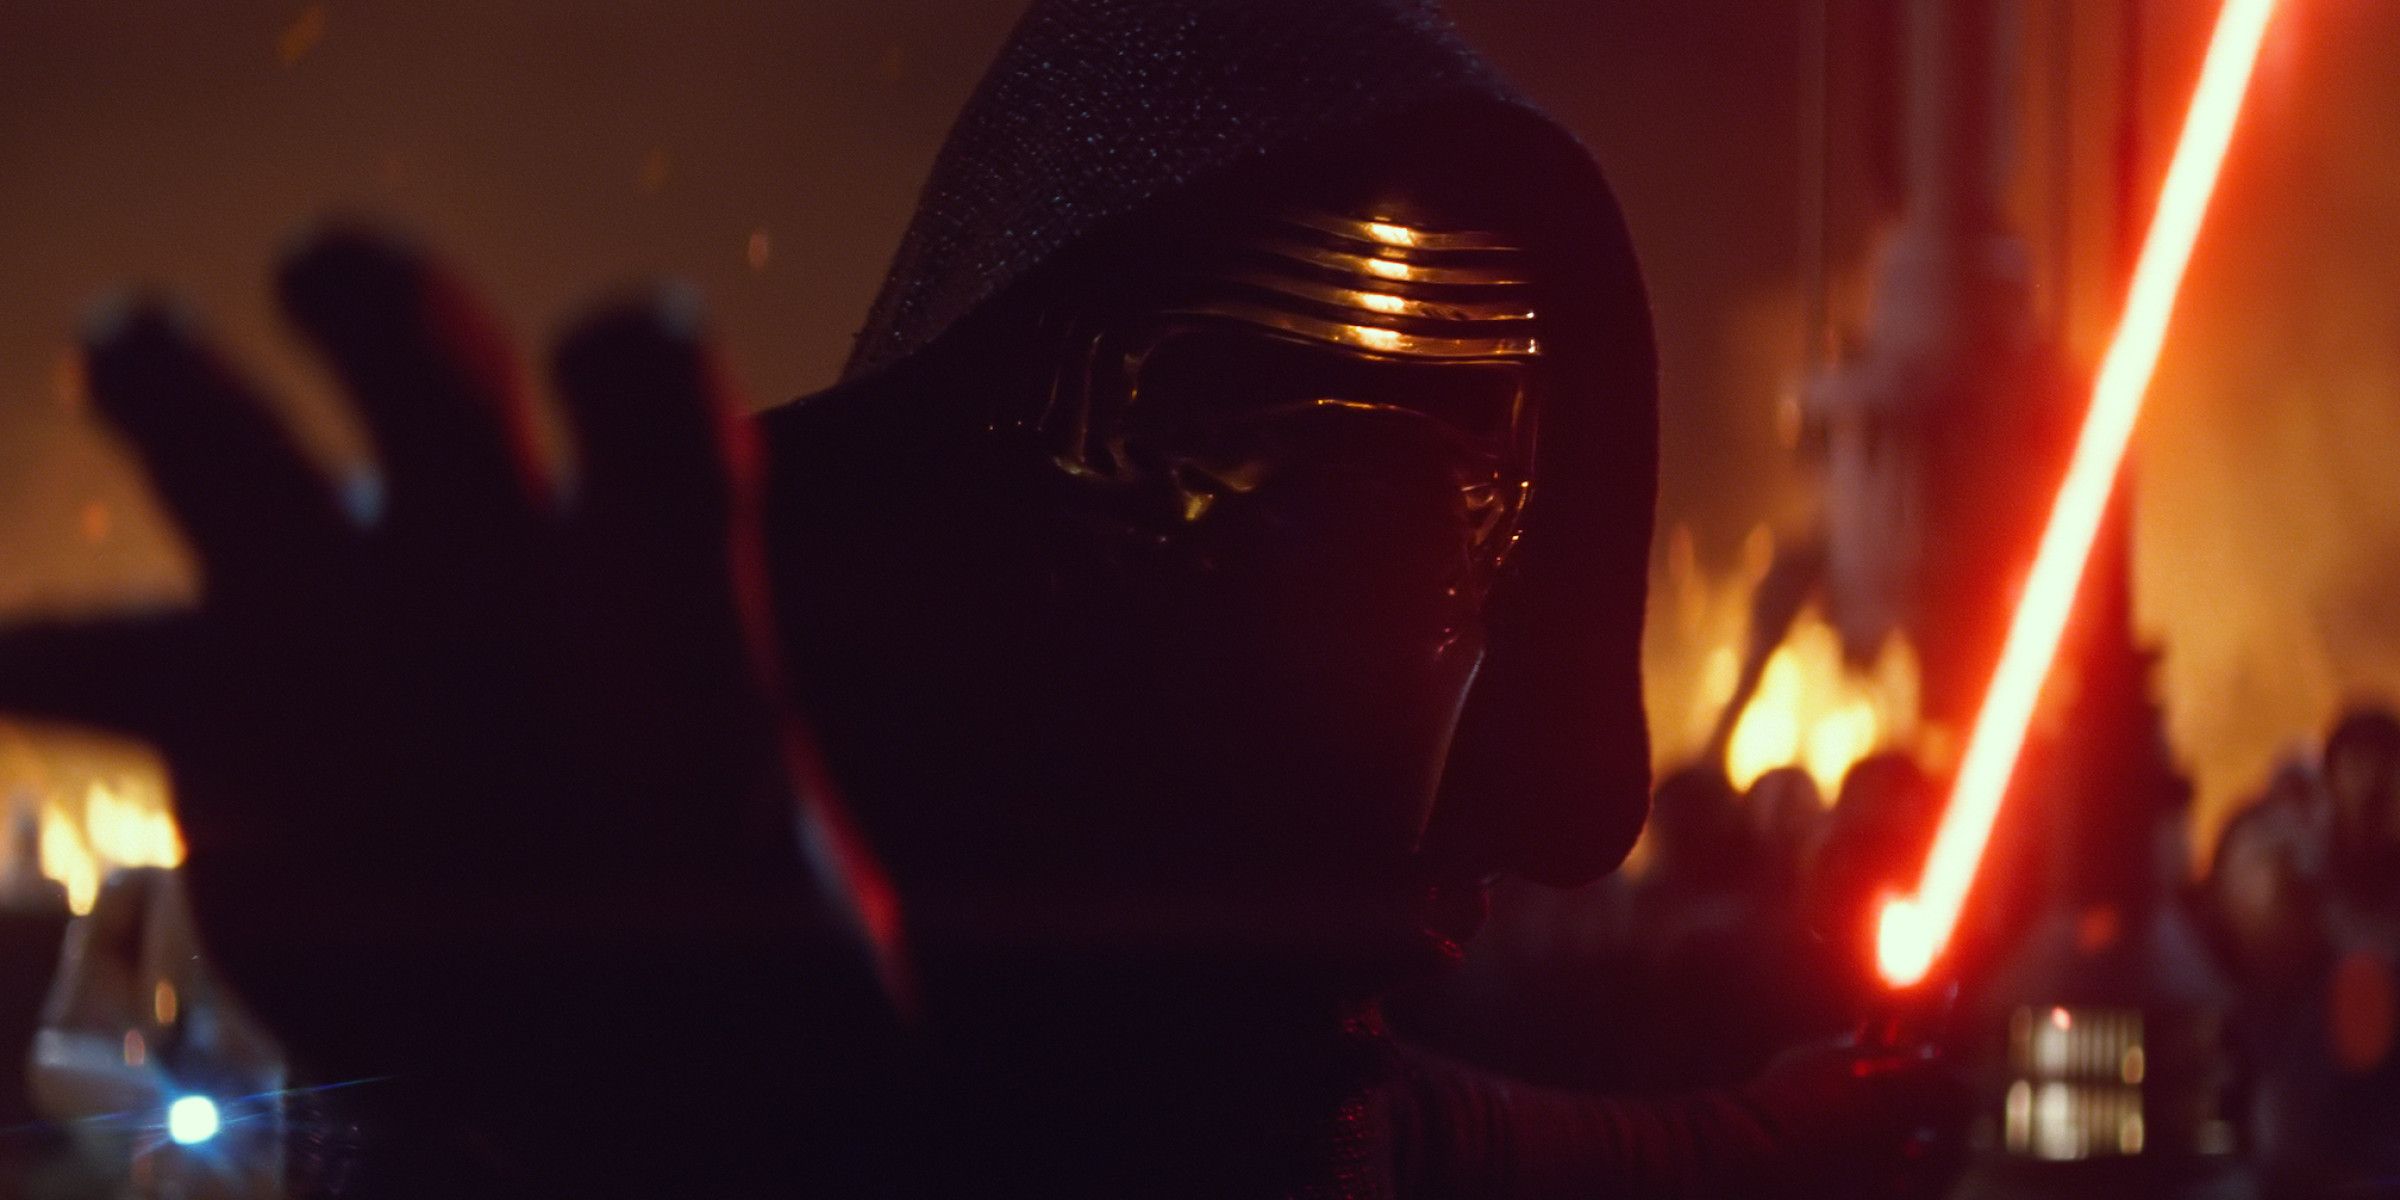 Kylo Ren with Lightsaber using the Force